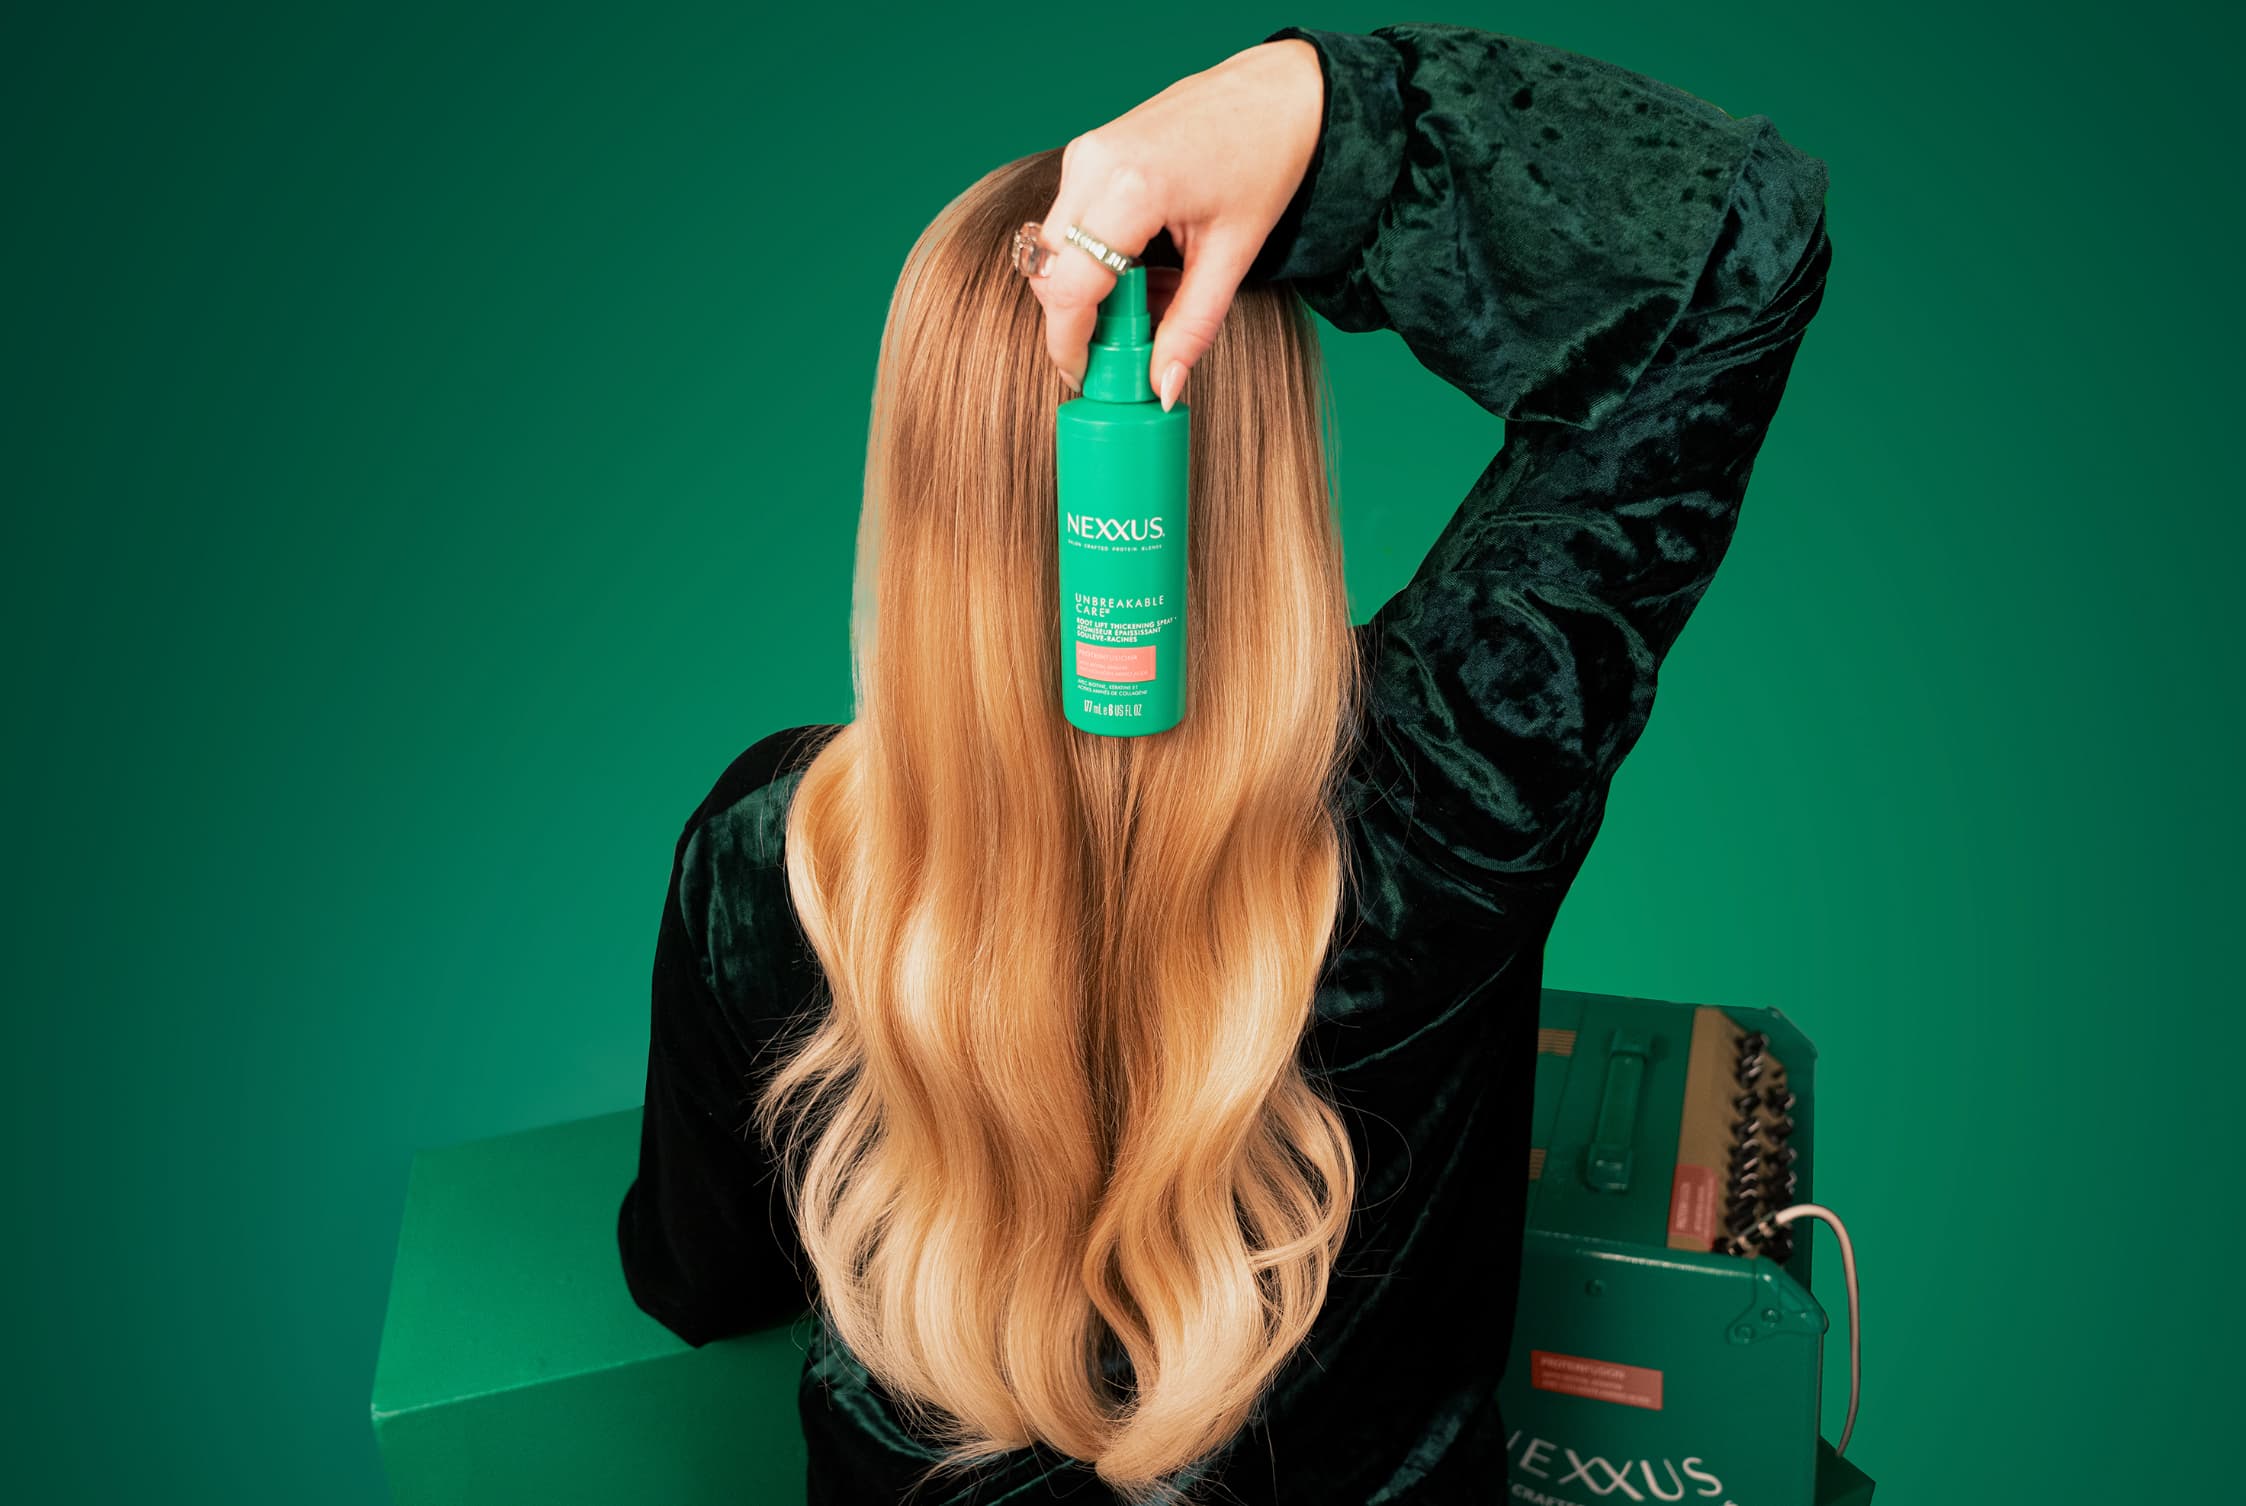 Photo of Meghan Trainor holding up the Nexxus Unbreakable Care bottle on top of the back of her long wavy blonde hair